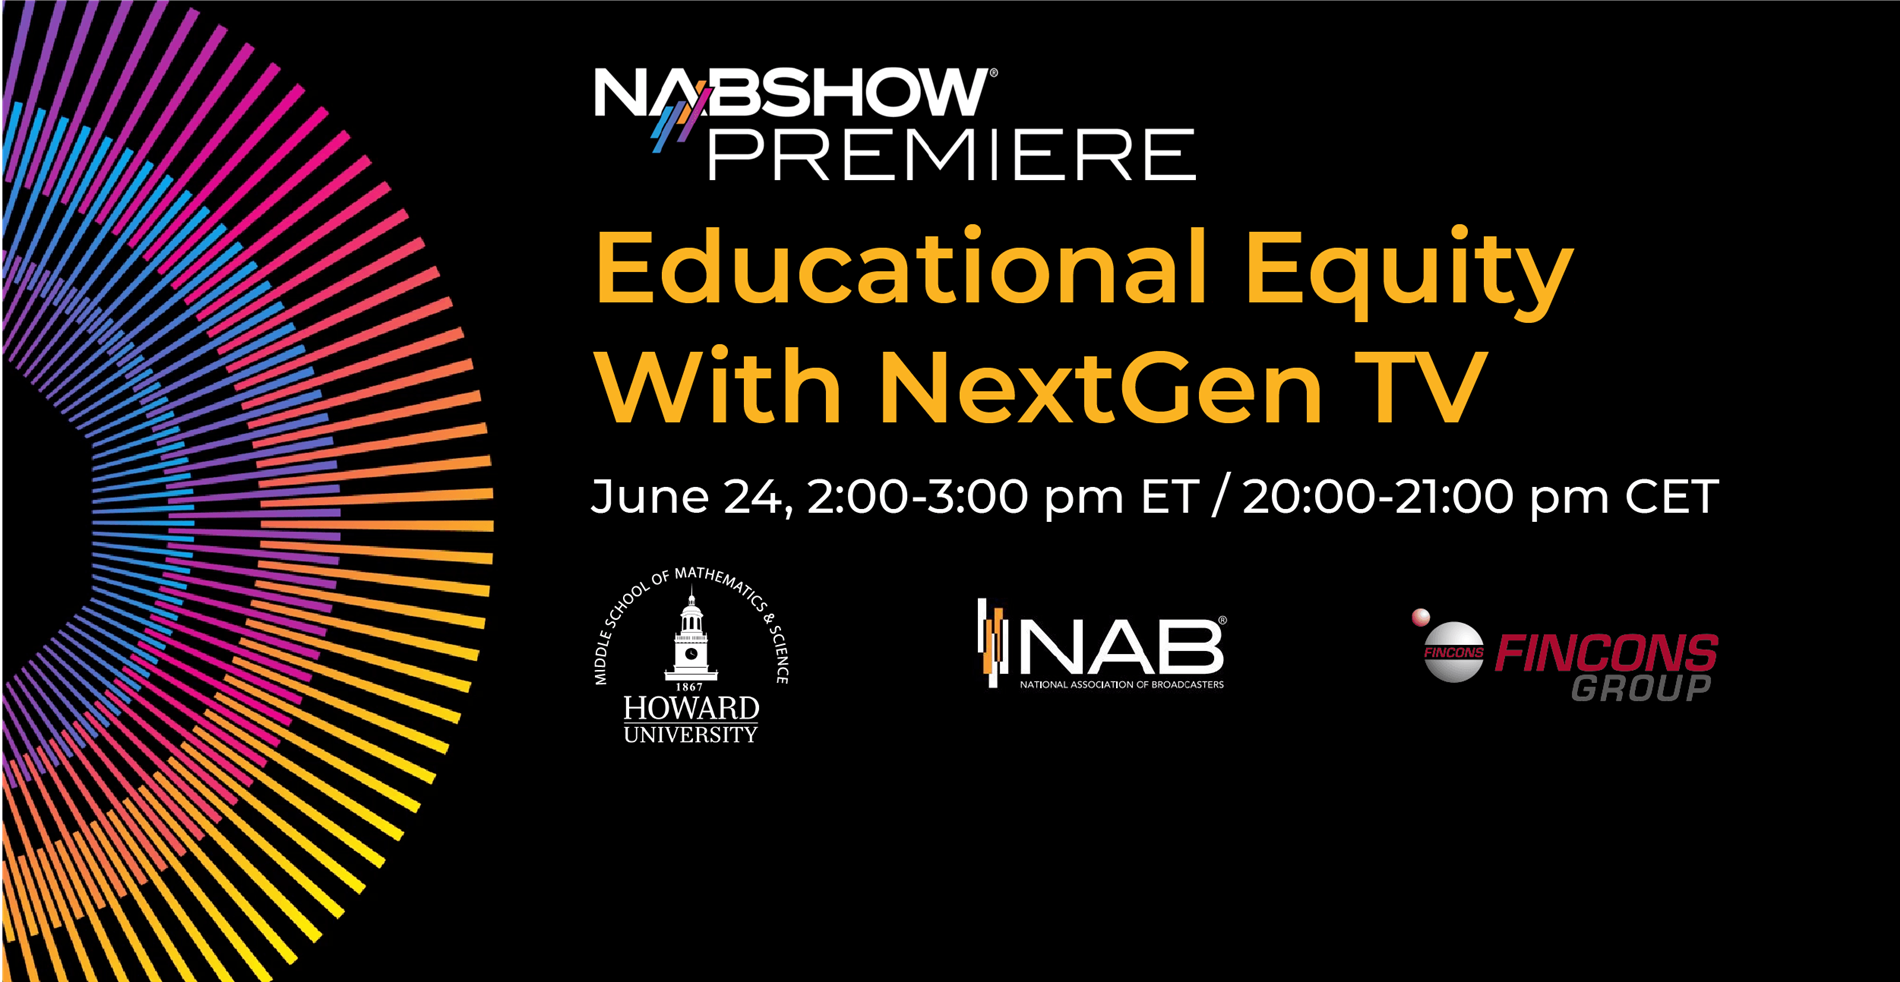 Educational Equity with NextGenTV and Fincons